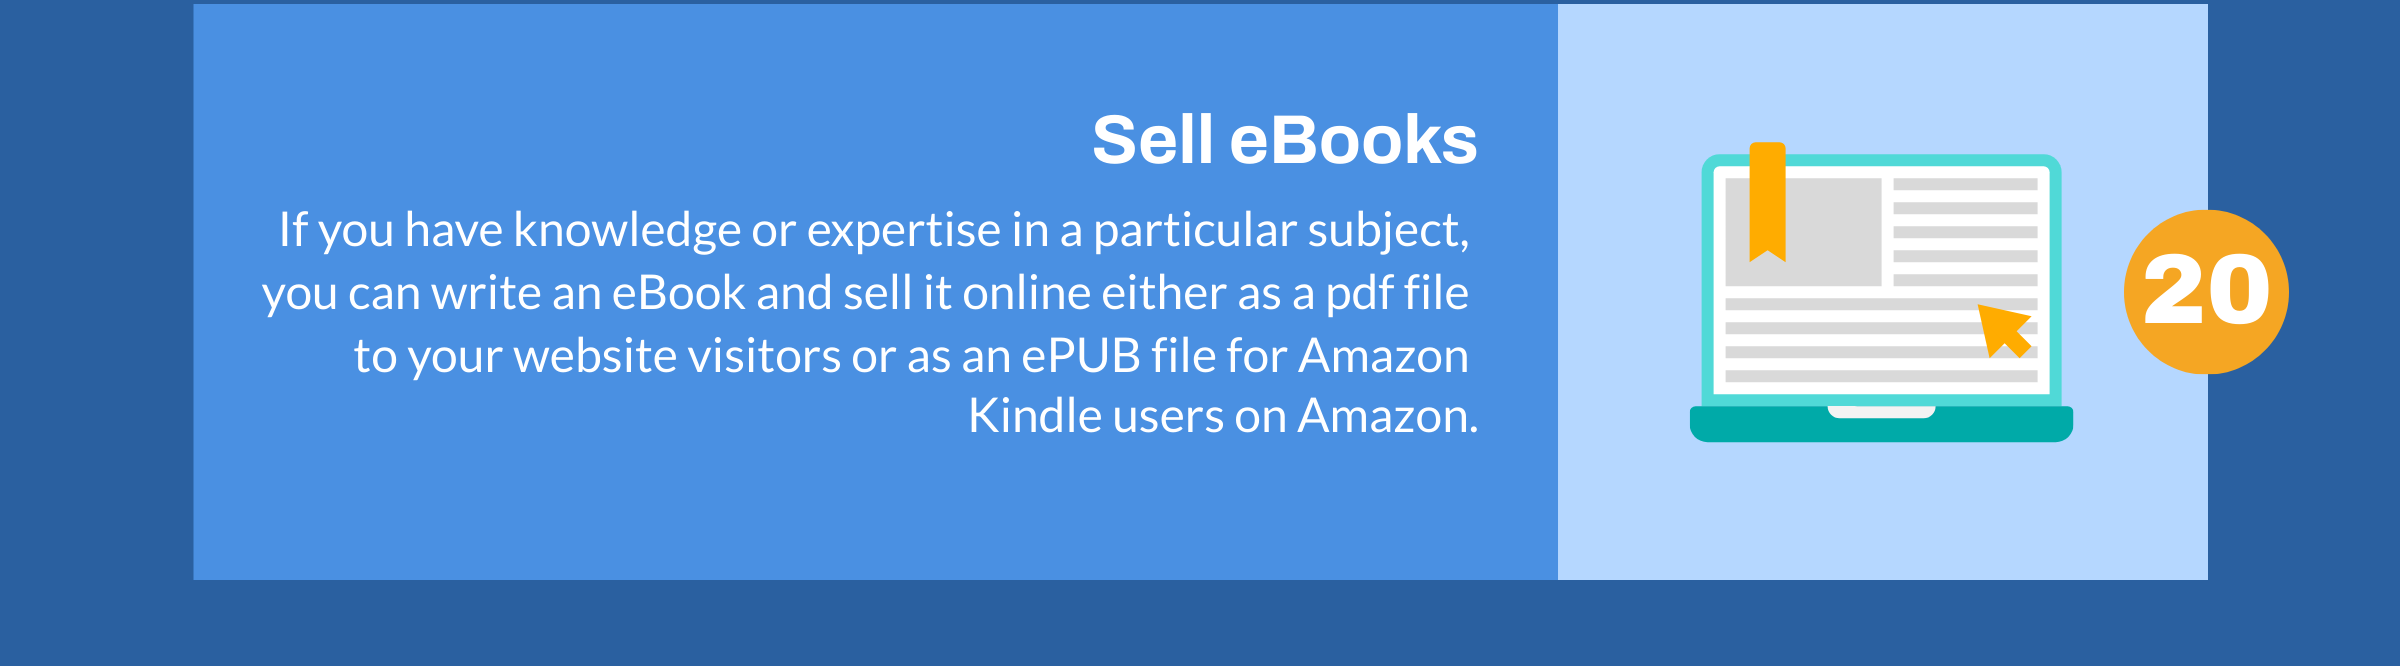 Ebook Selling Business